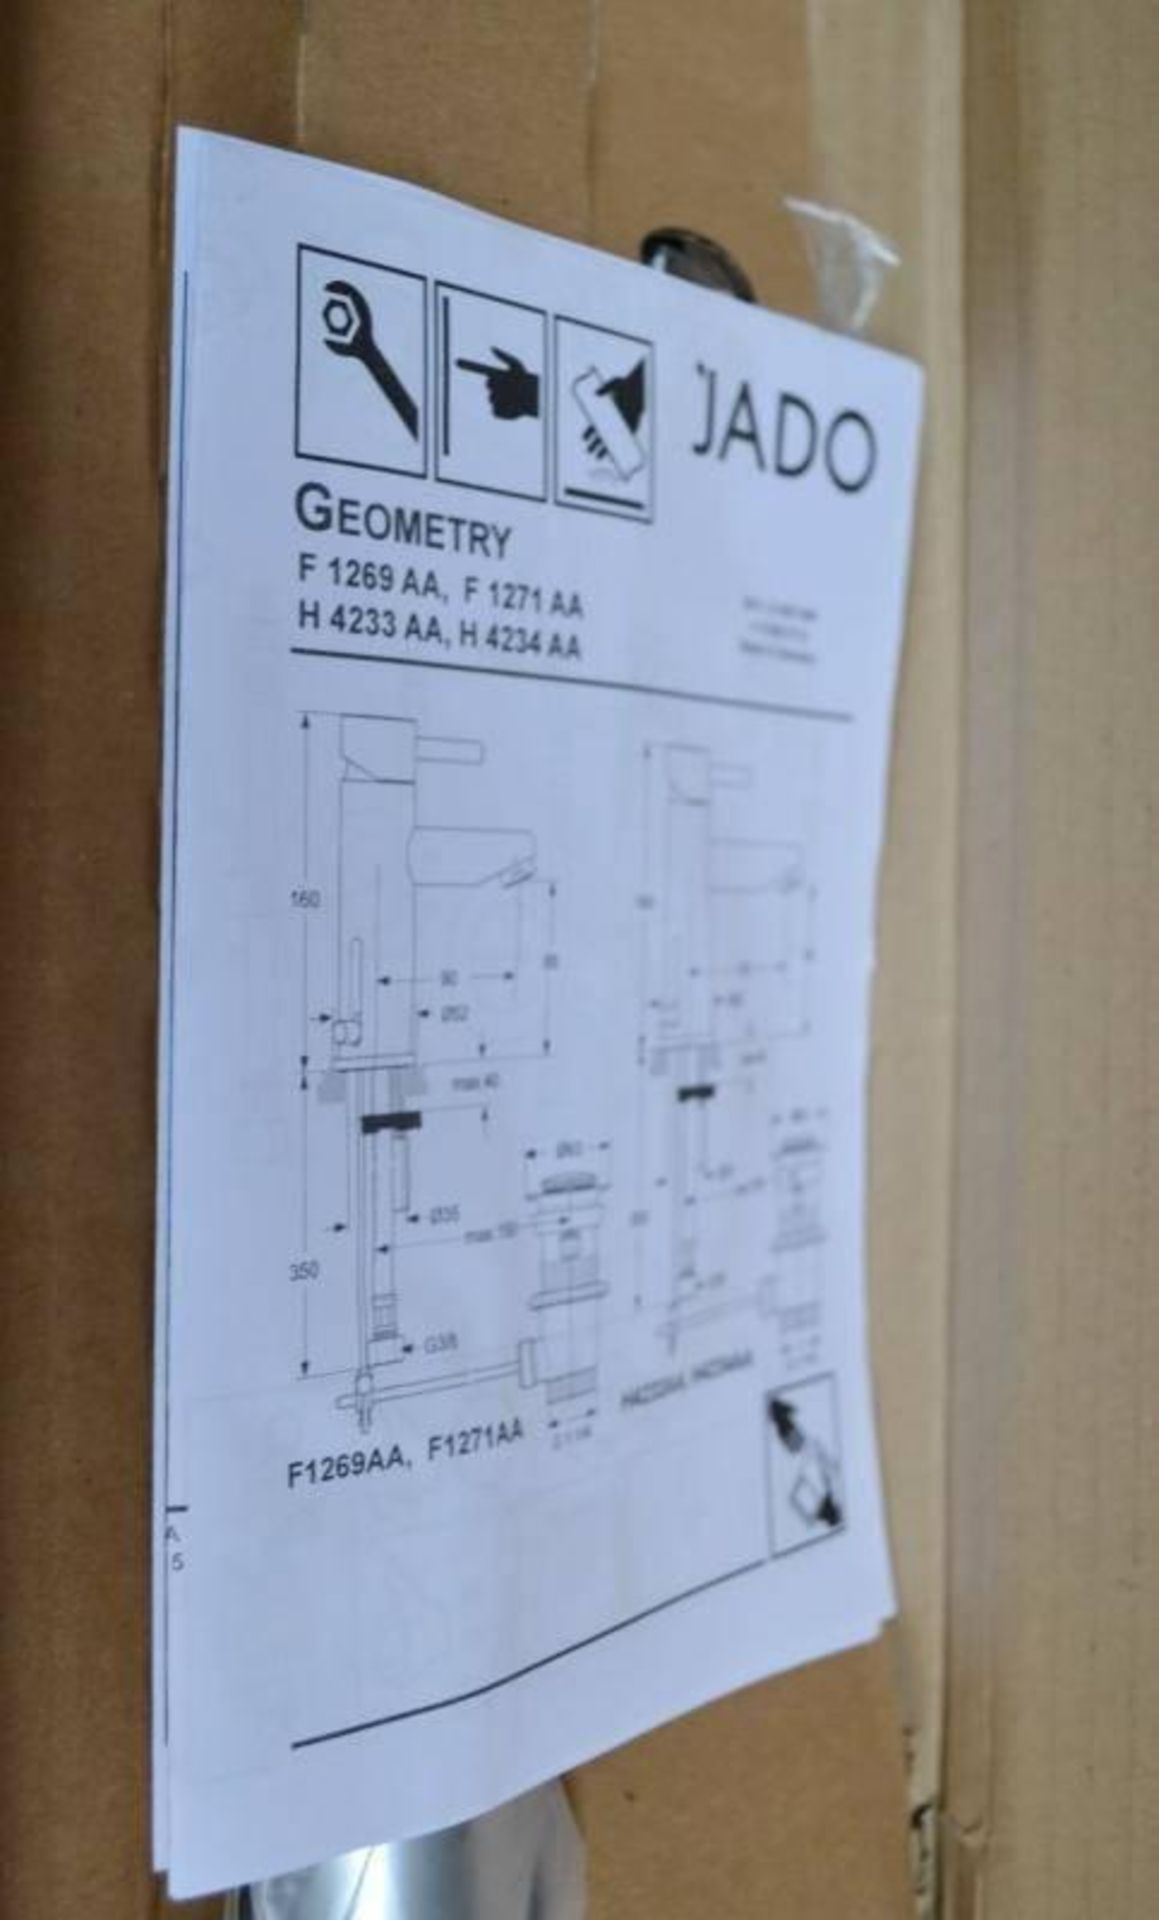 1 x Ideal Standard JADO "Geometry" Single Lever Deck-Mounted Basin Mixer Without Waste Set (F1271AA) - Image 8 of 8